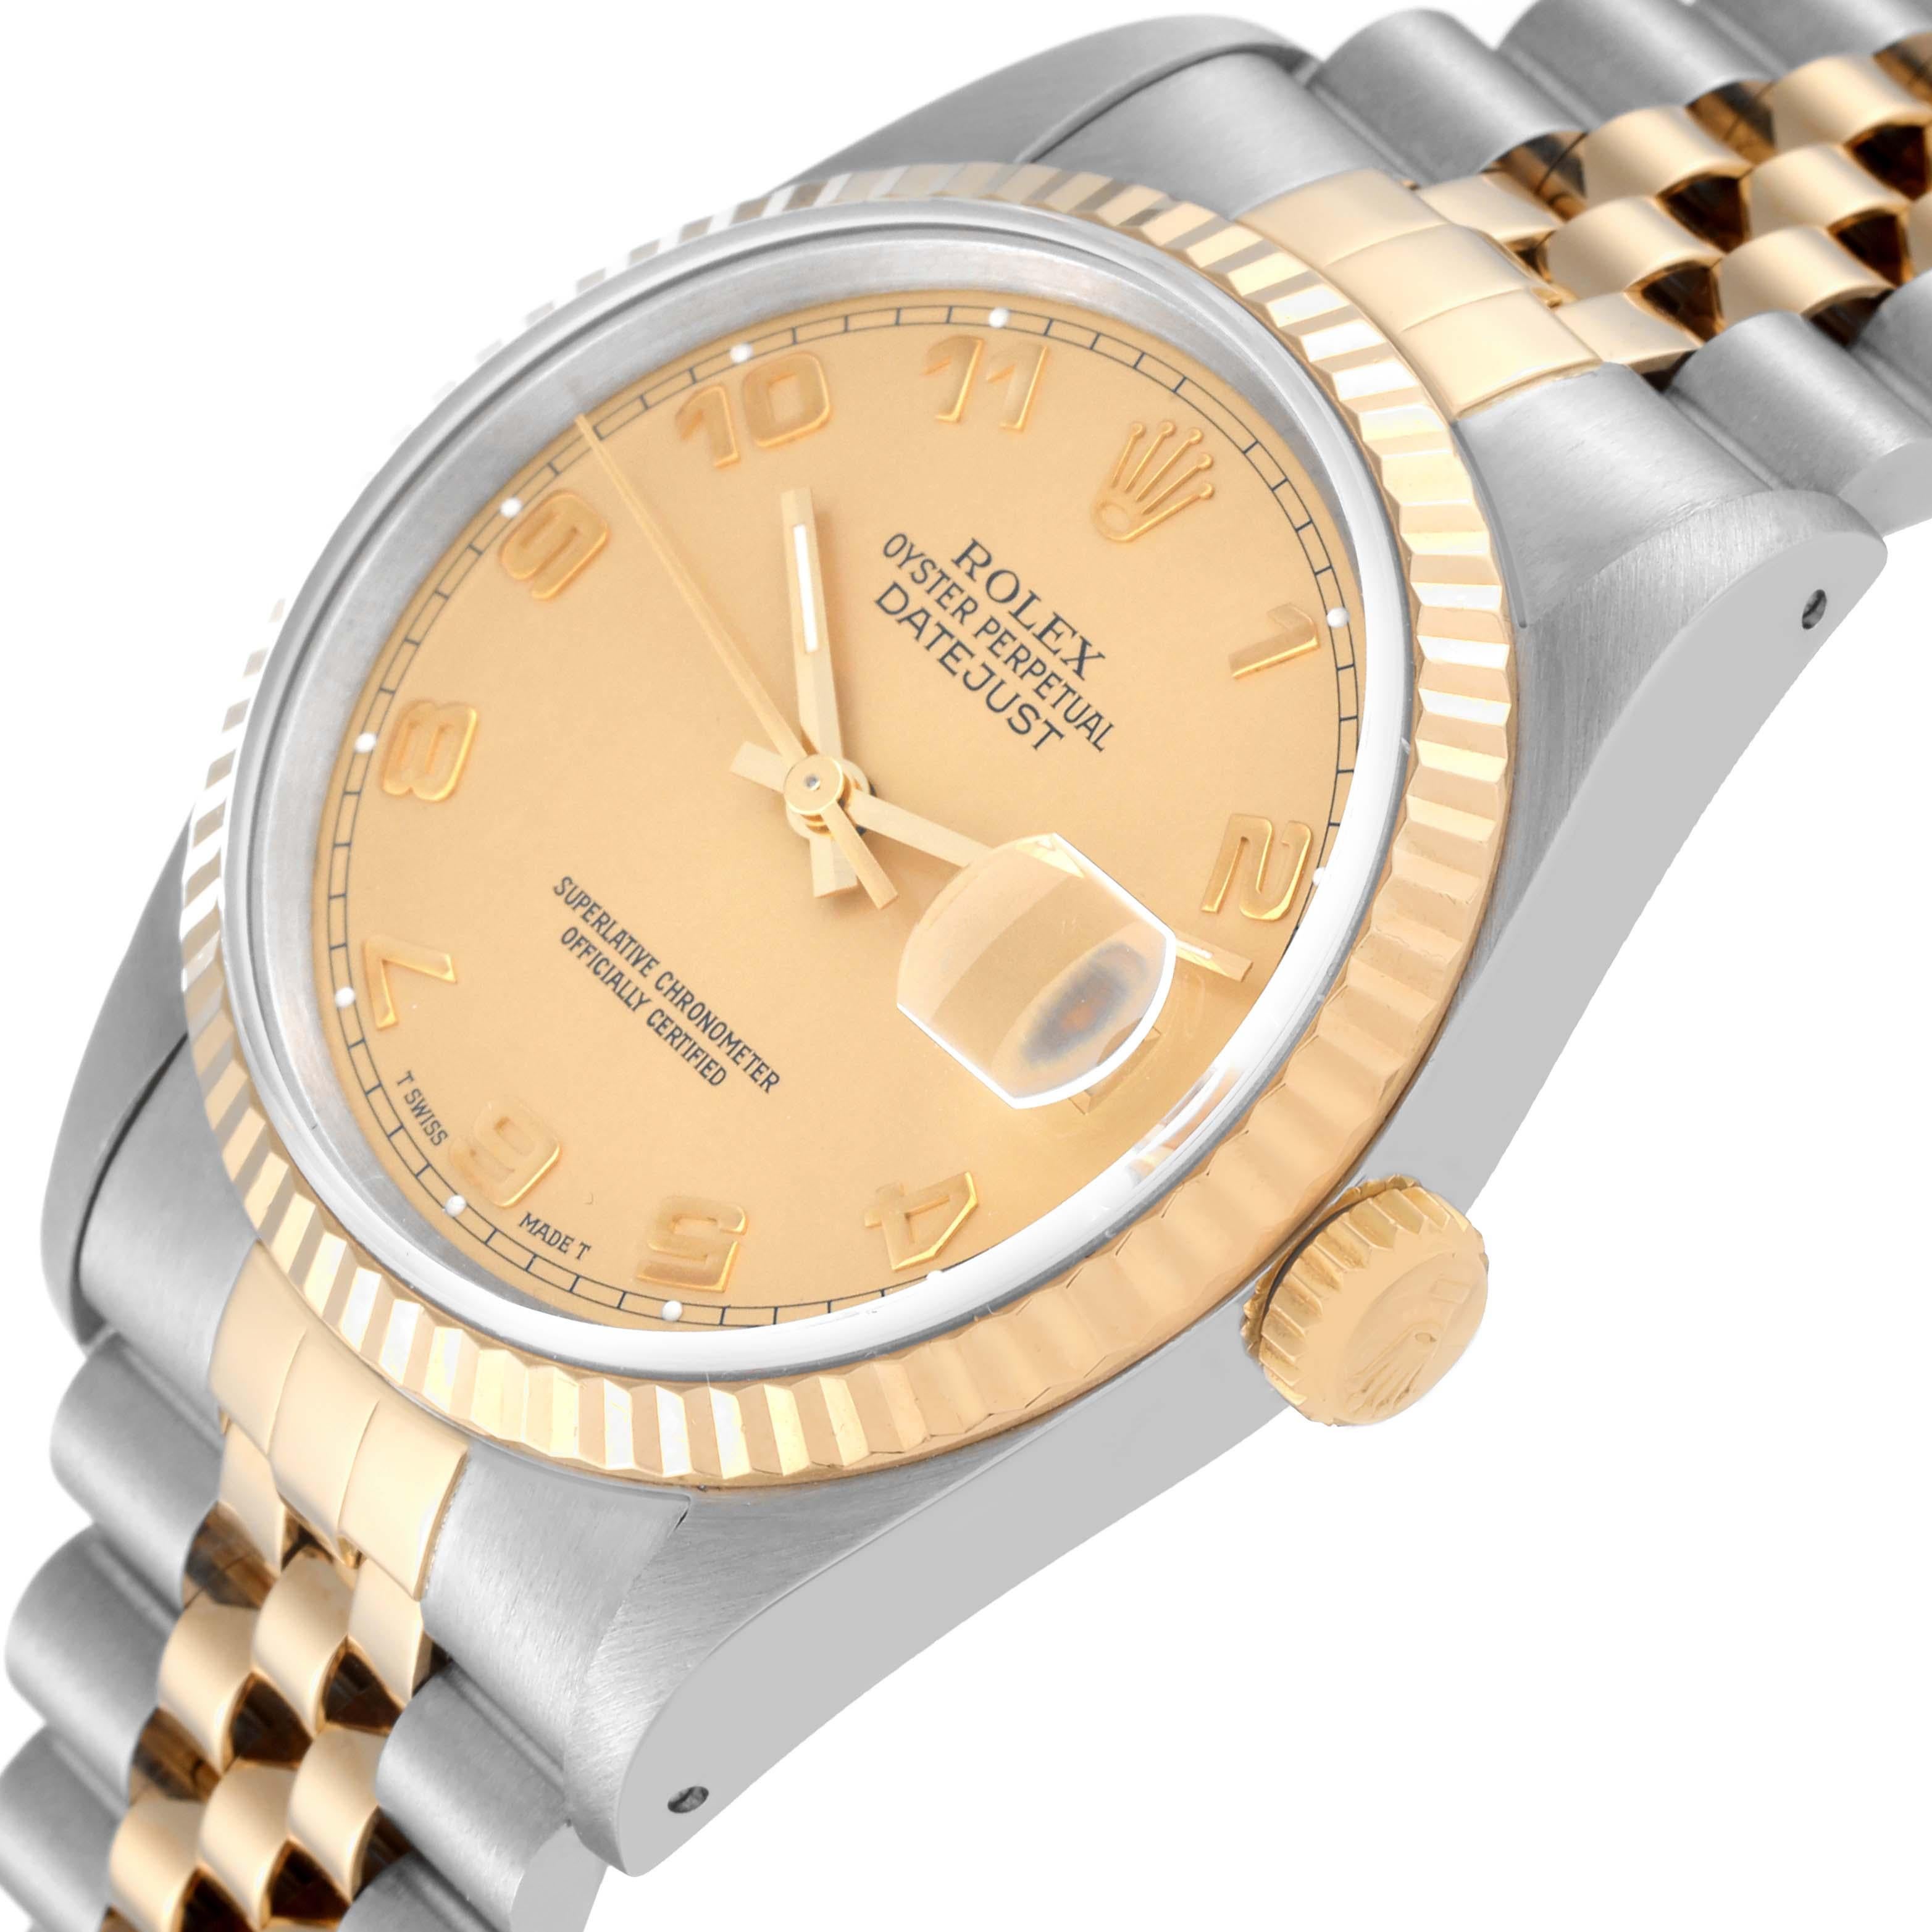 Rolex Datejust Steel Yellow Gold Champagne Arabic Dial Watch 16233 Box Papers For Sale 1